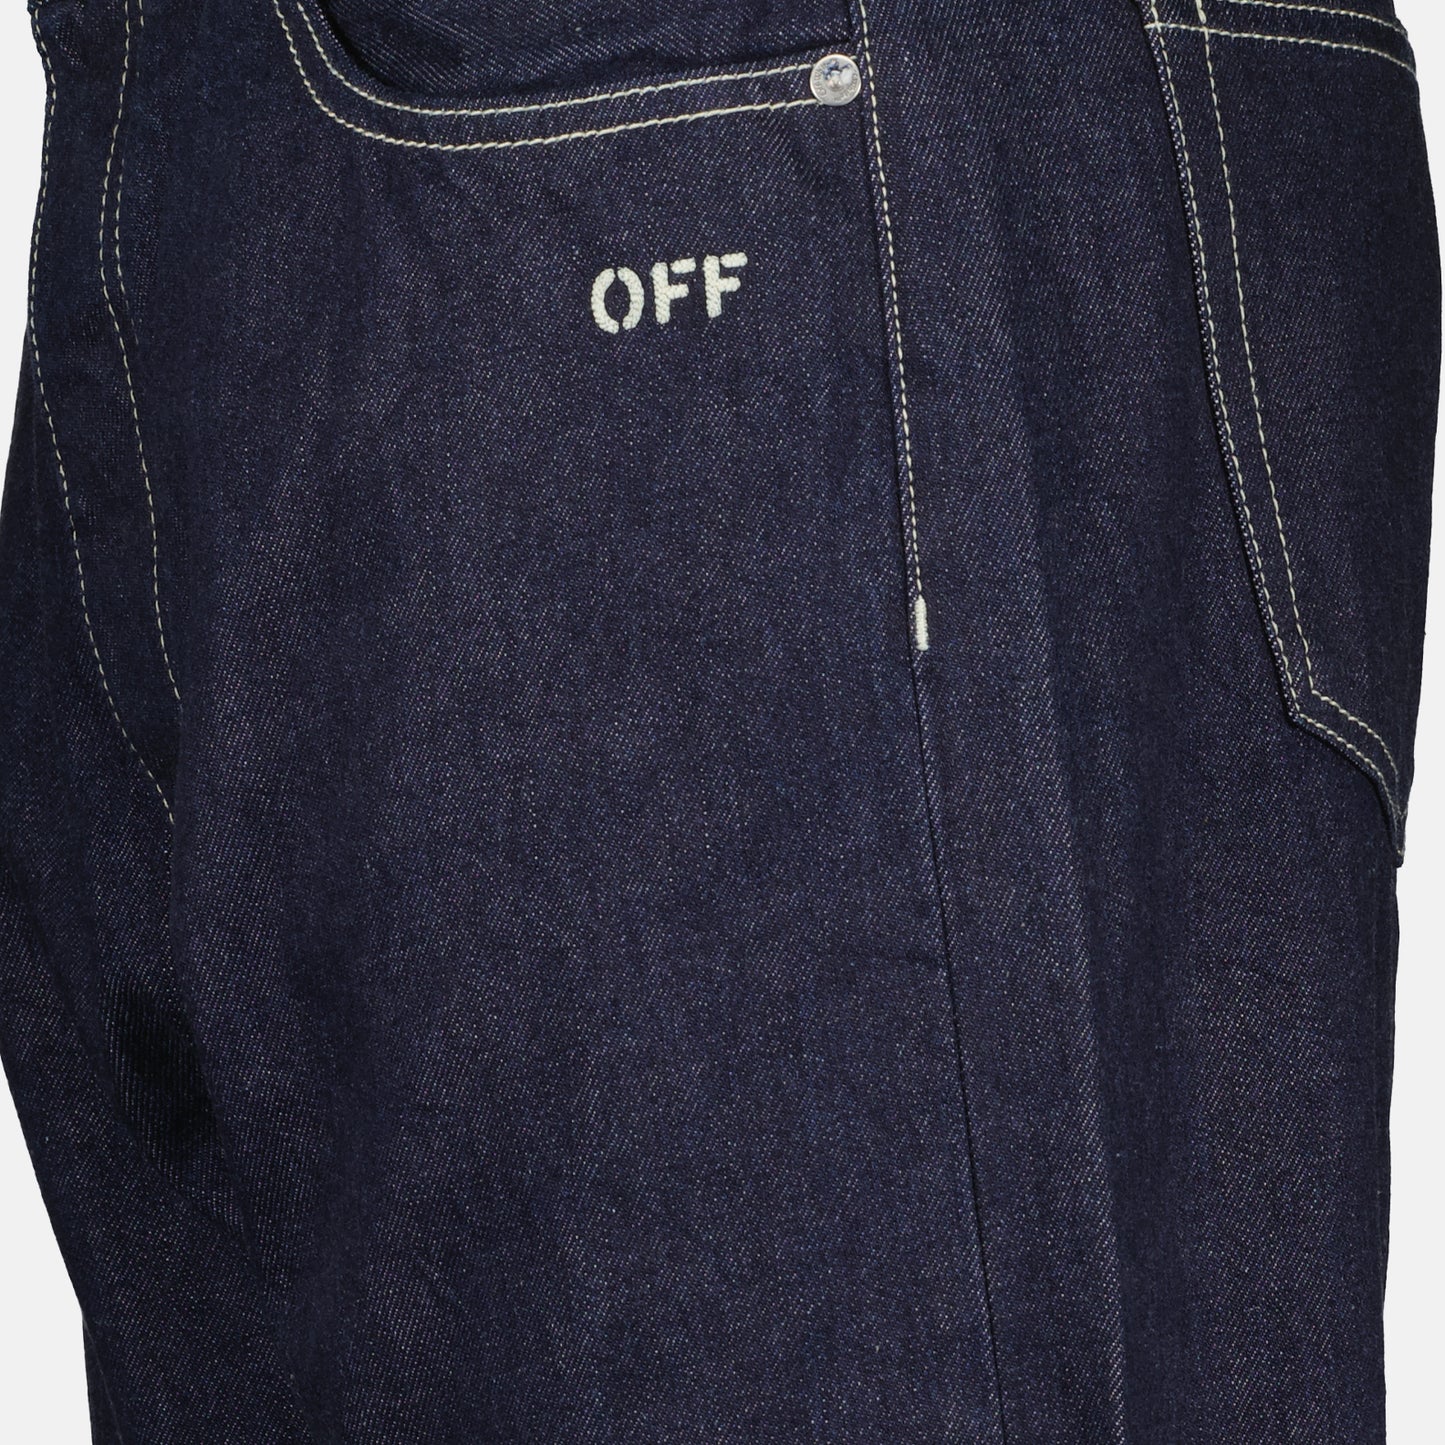 Off Skate straight jeans